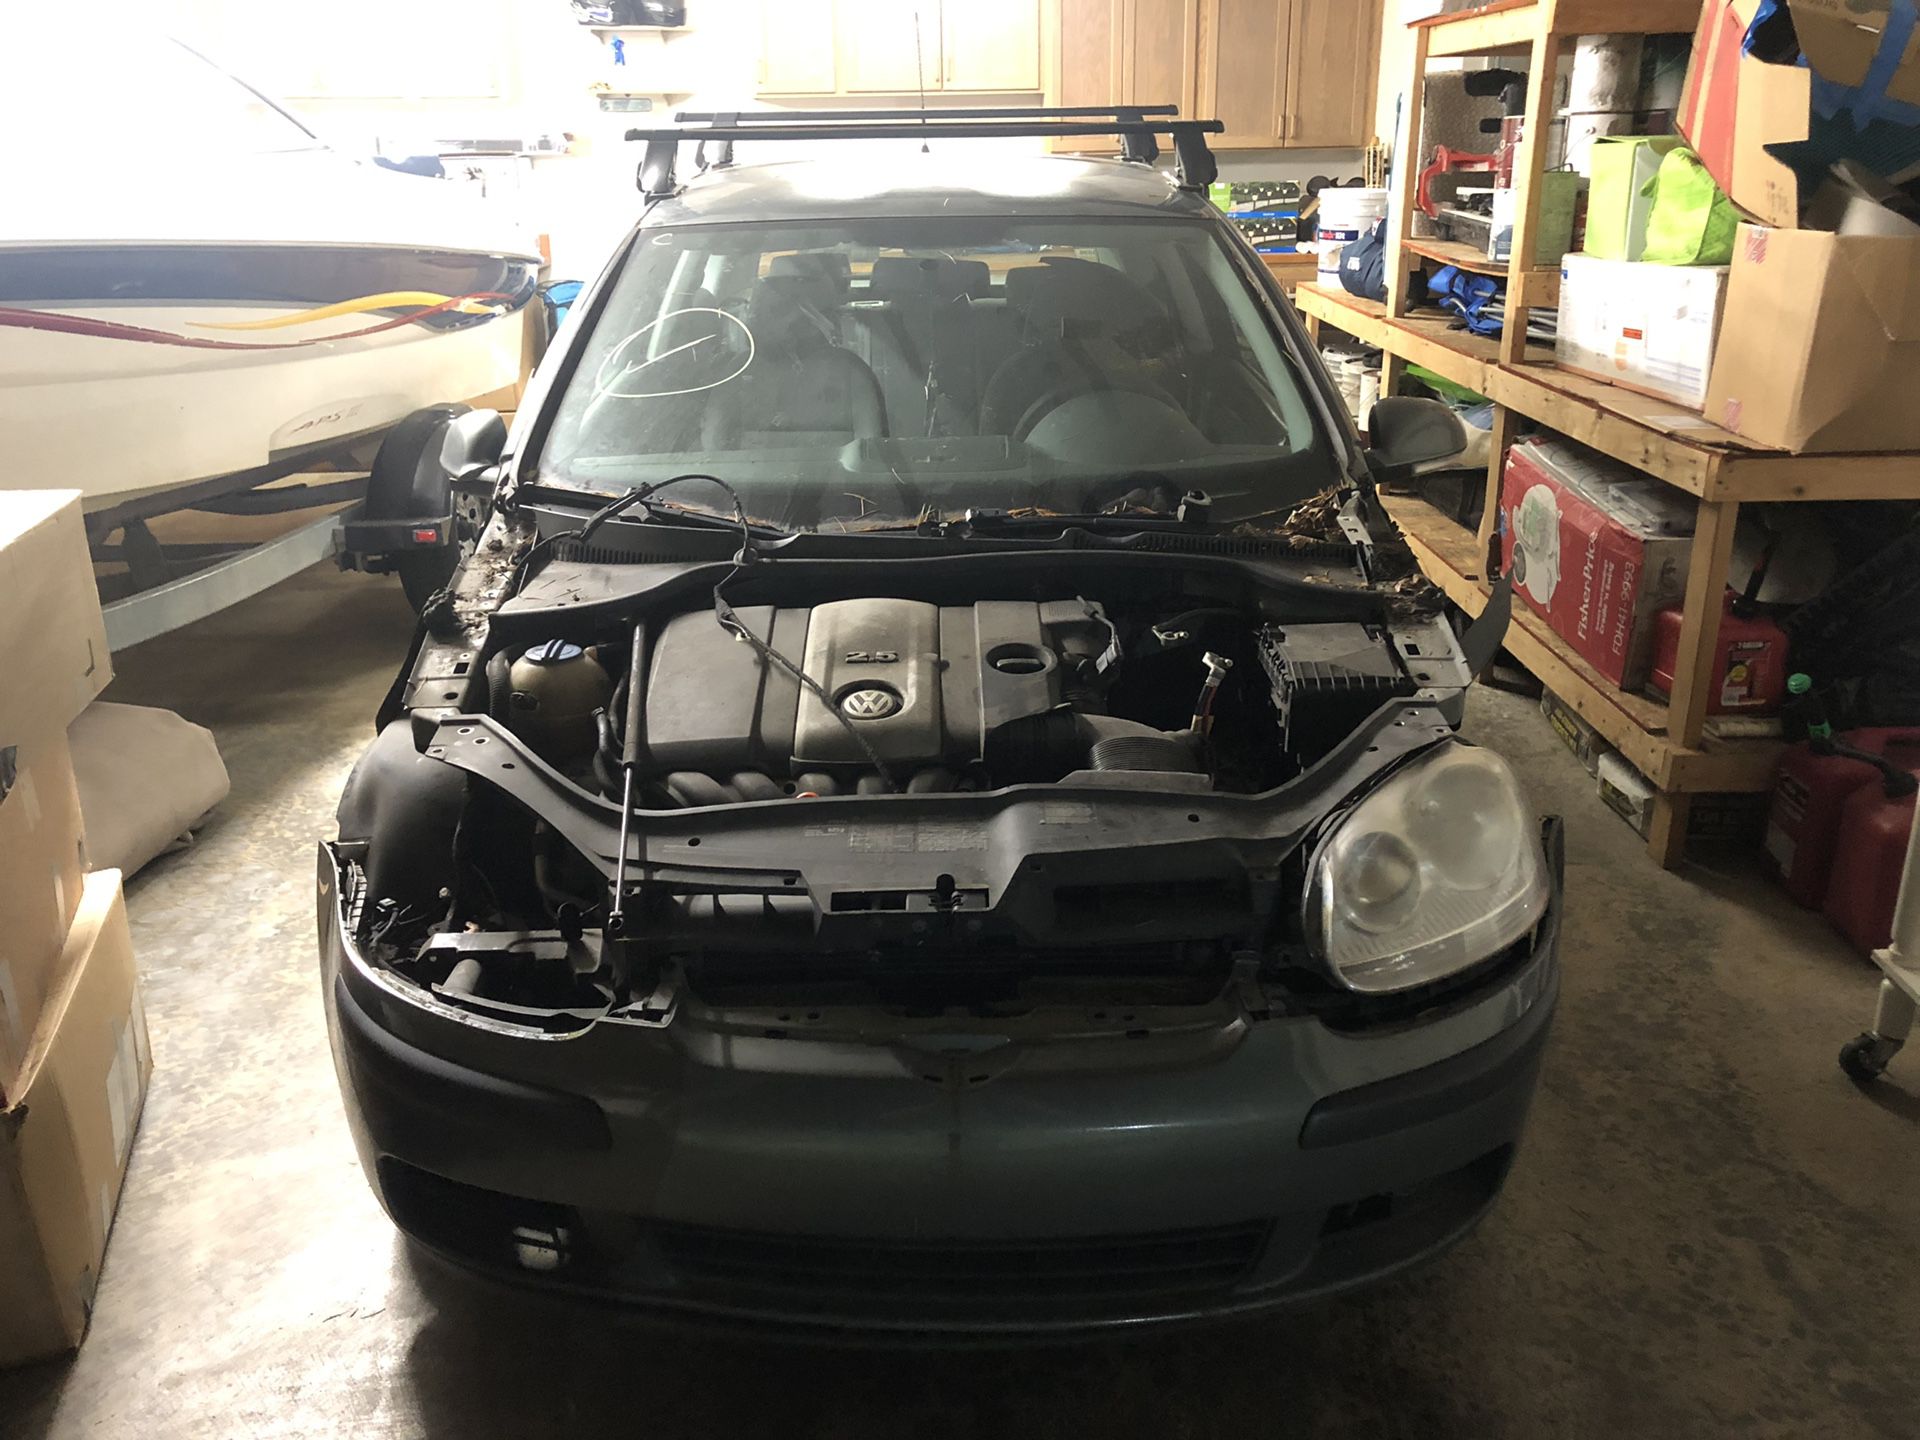 2007 Volkswagen rabbit parting out